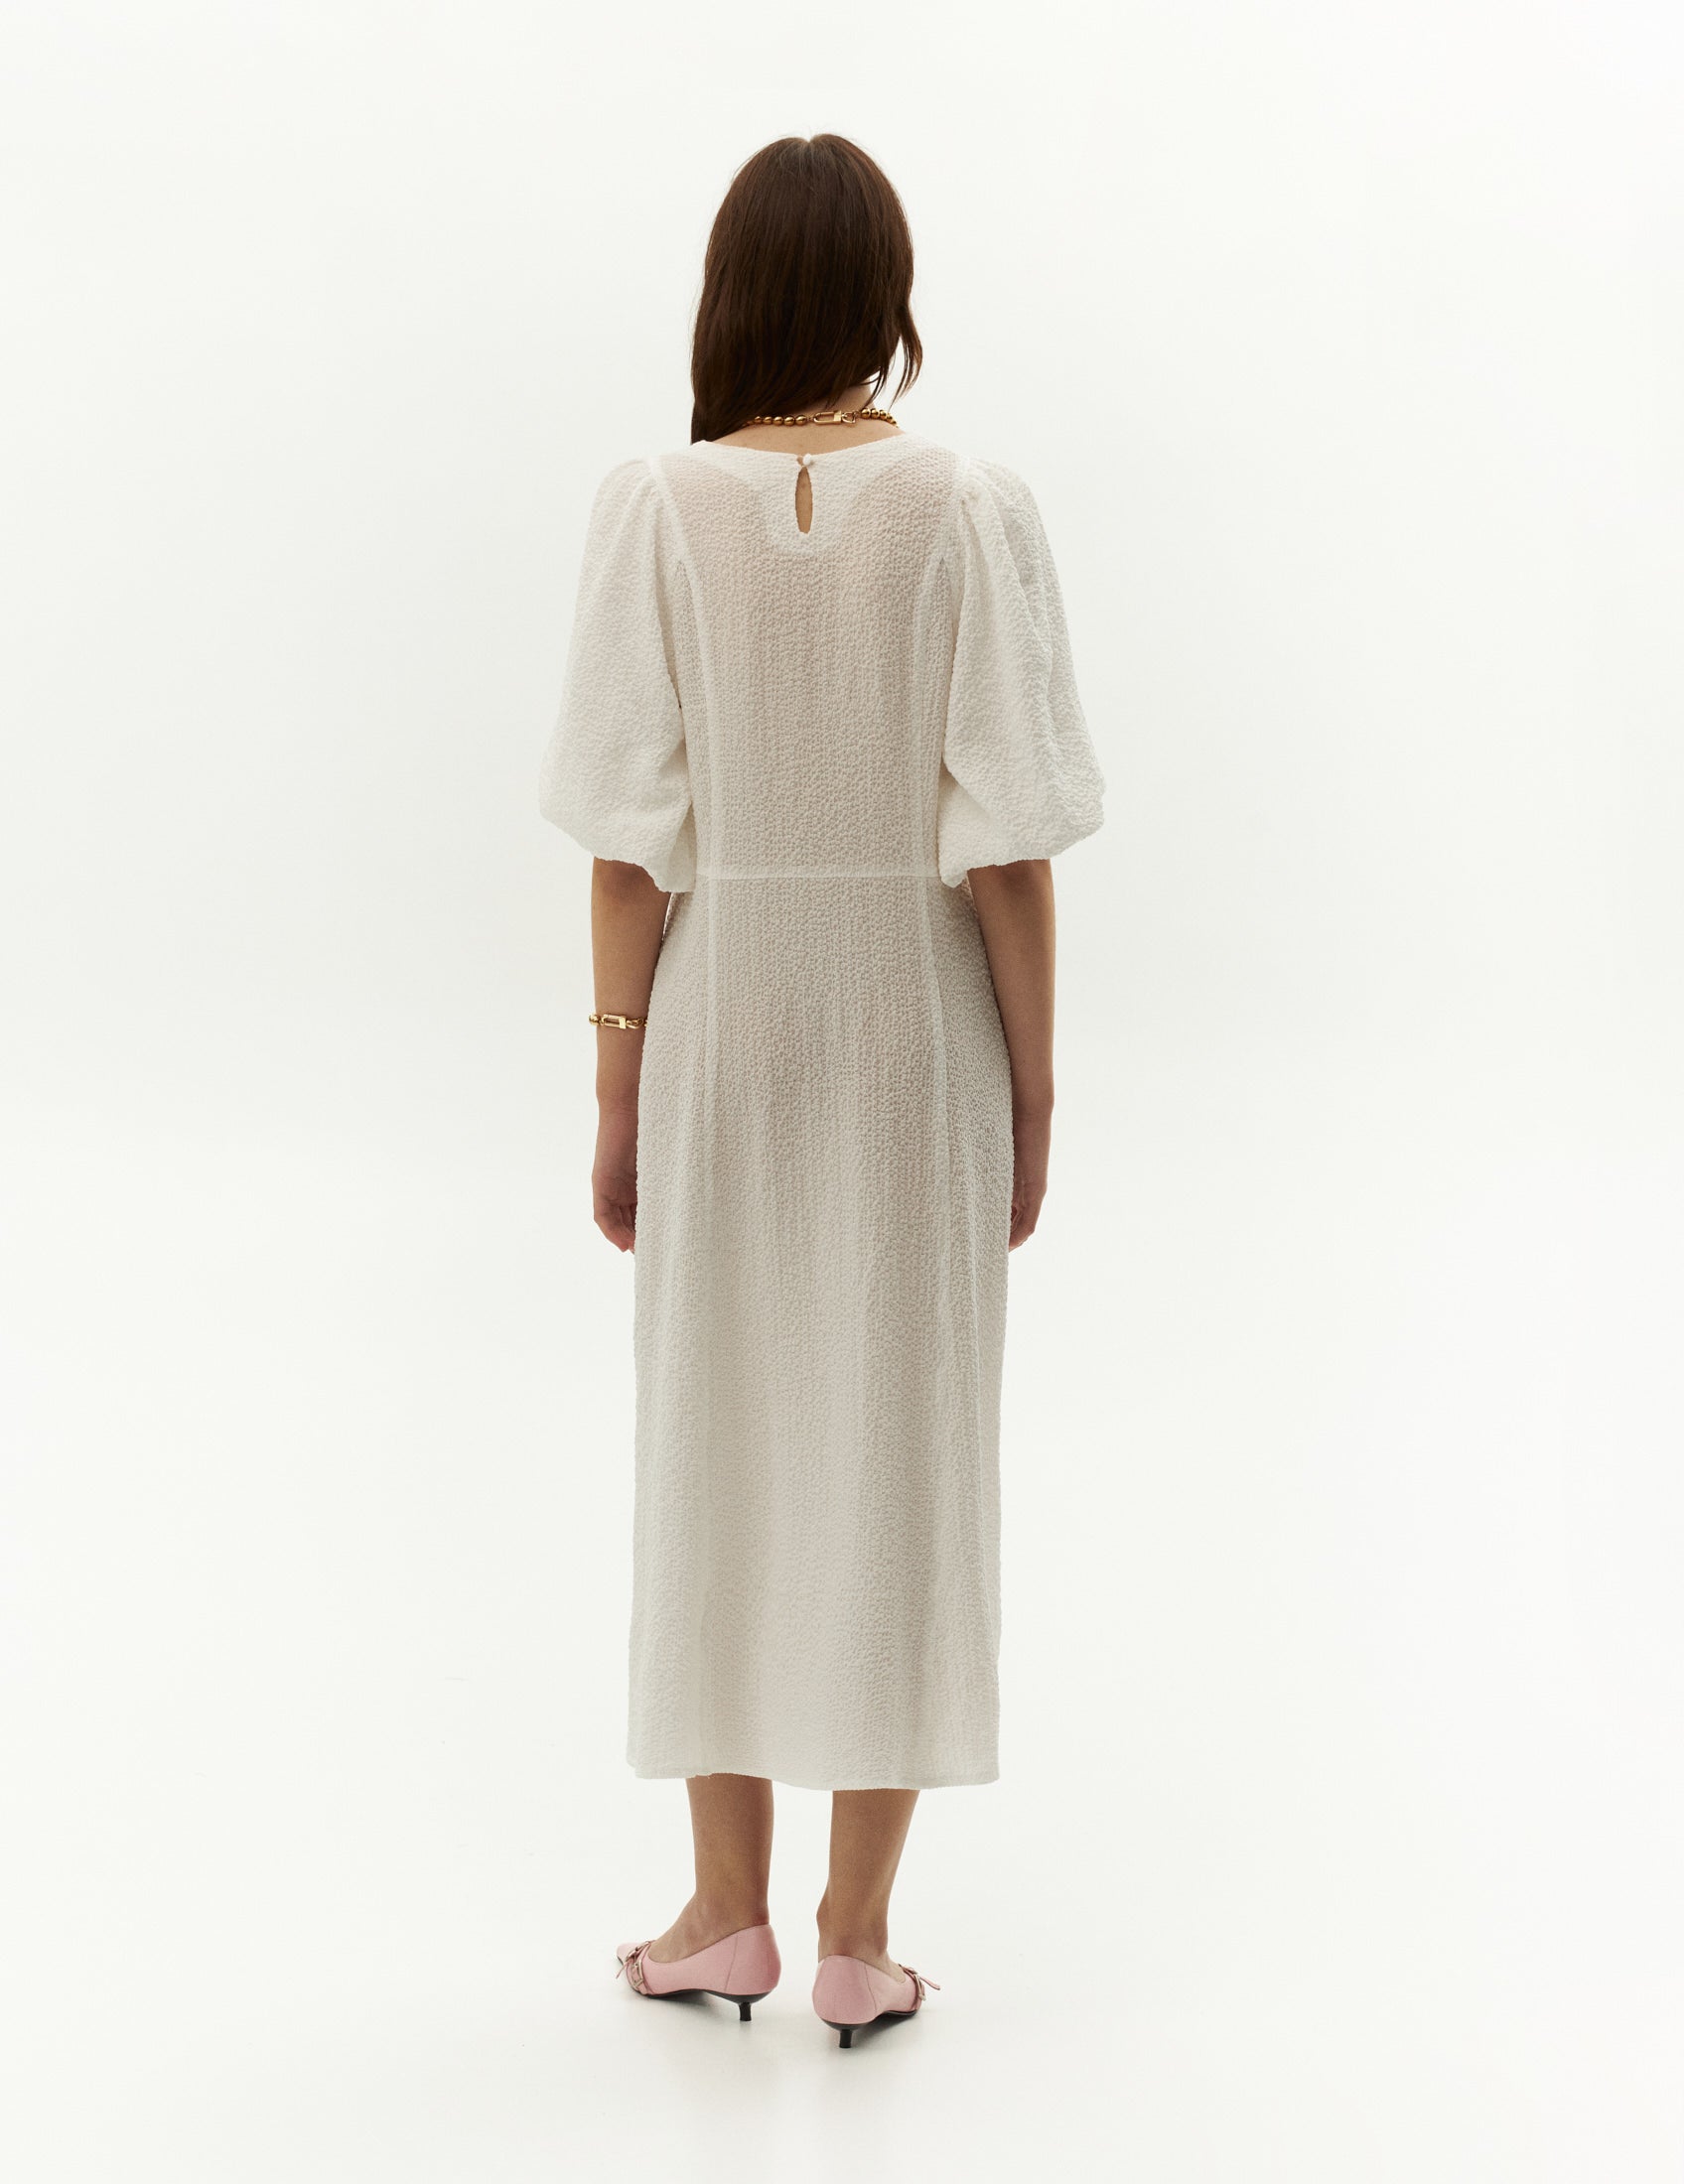 White textured long dress, wedding long white dress, casual wedding dress from FORMA brand